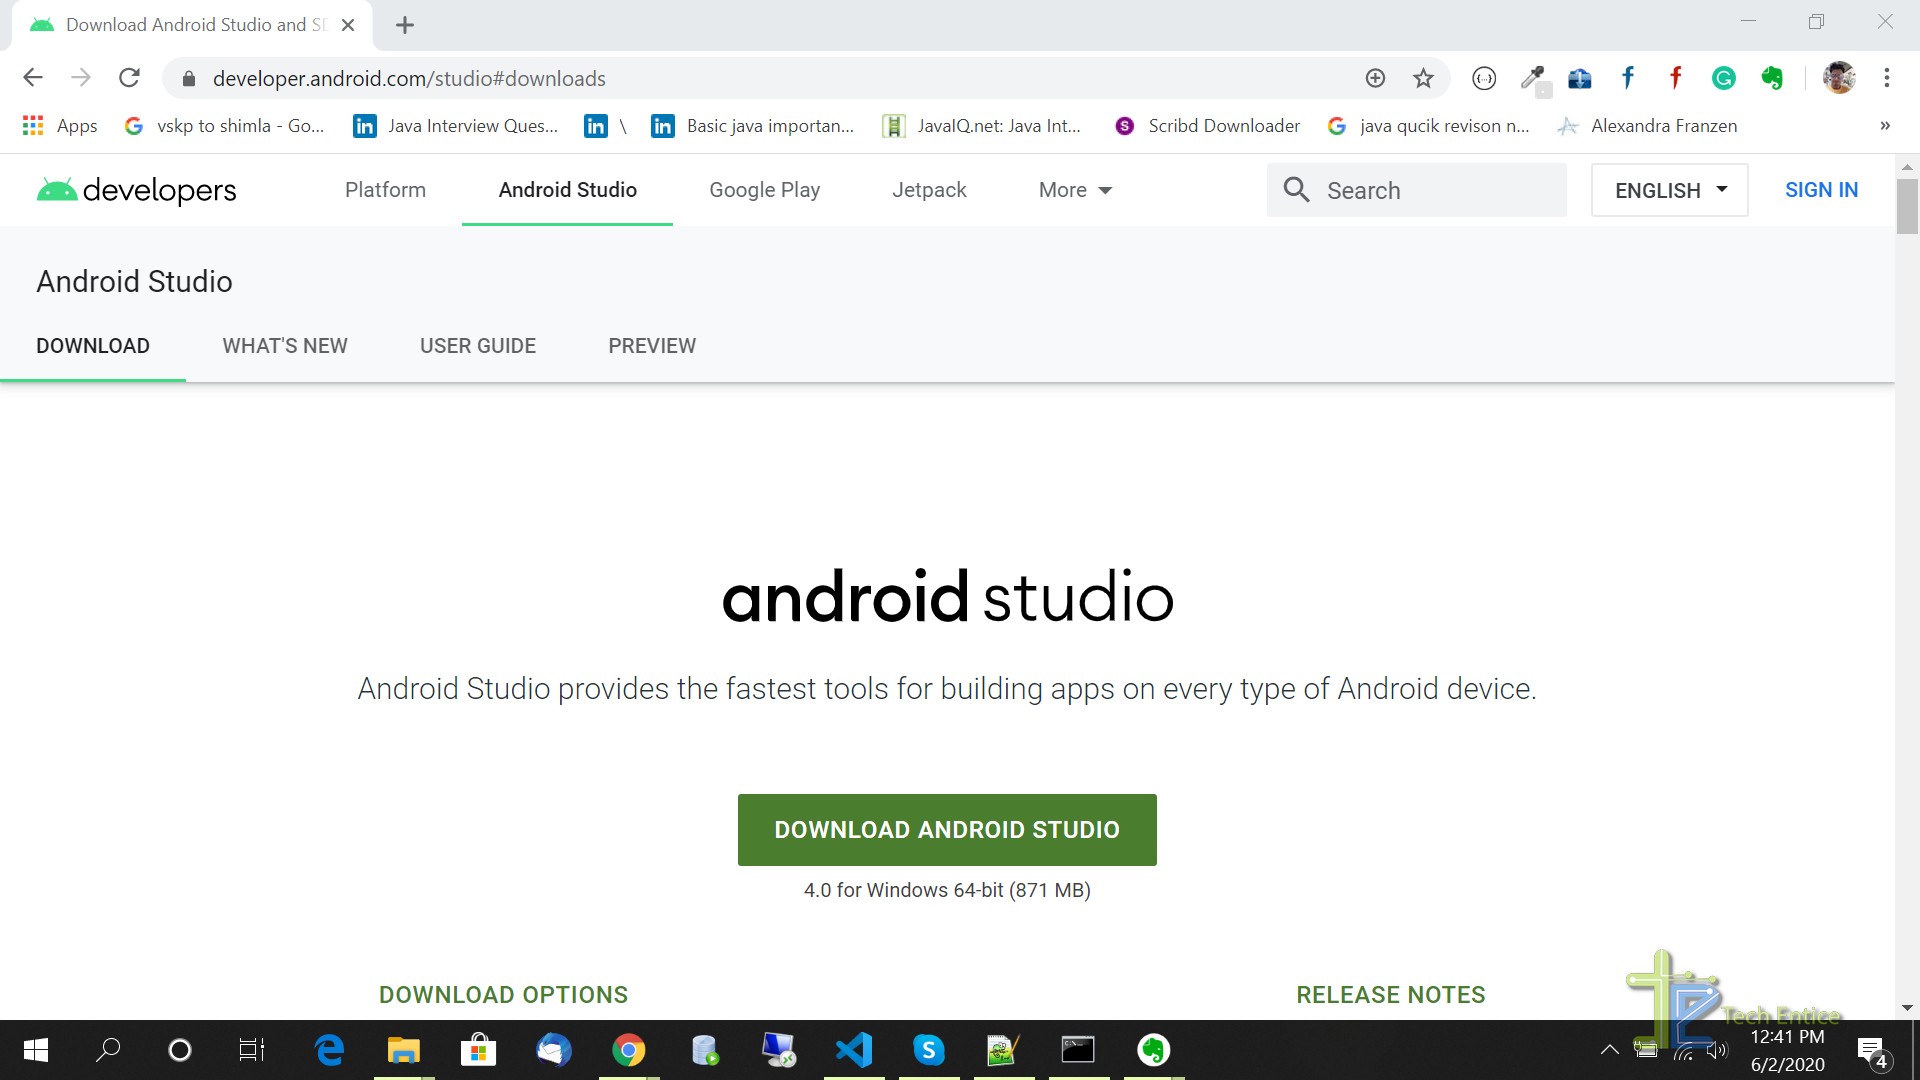 How To Set Up Android Studio on 64-bit Windows 10